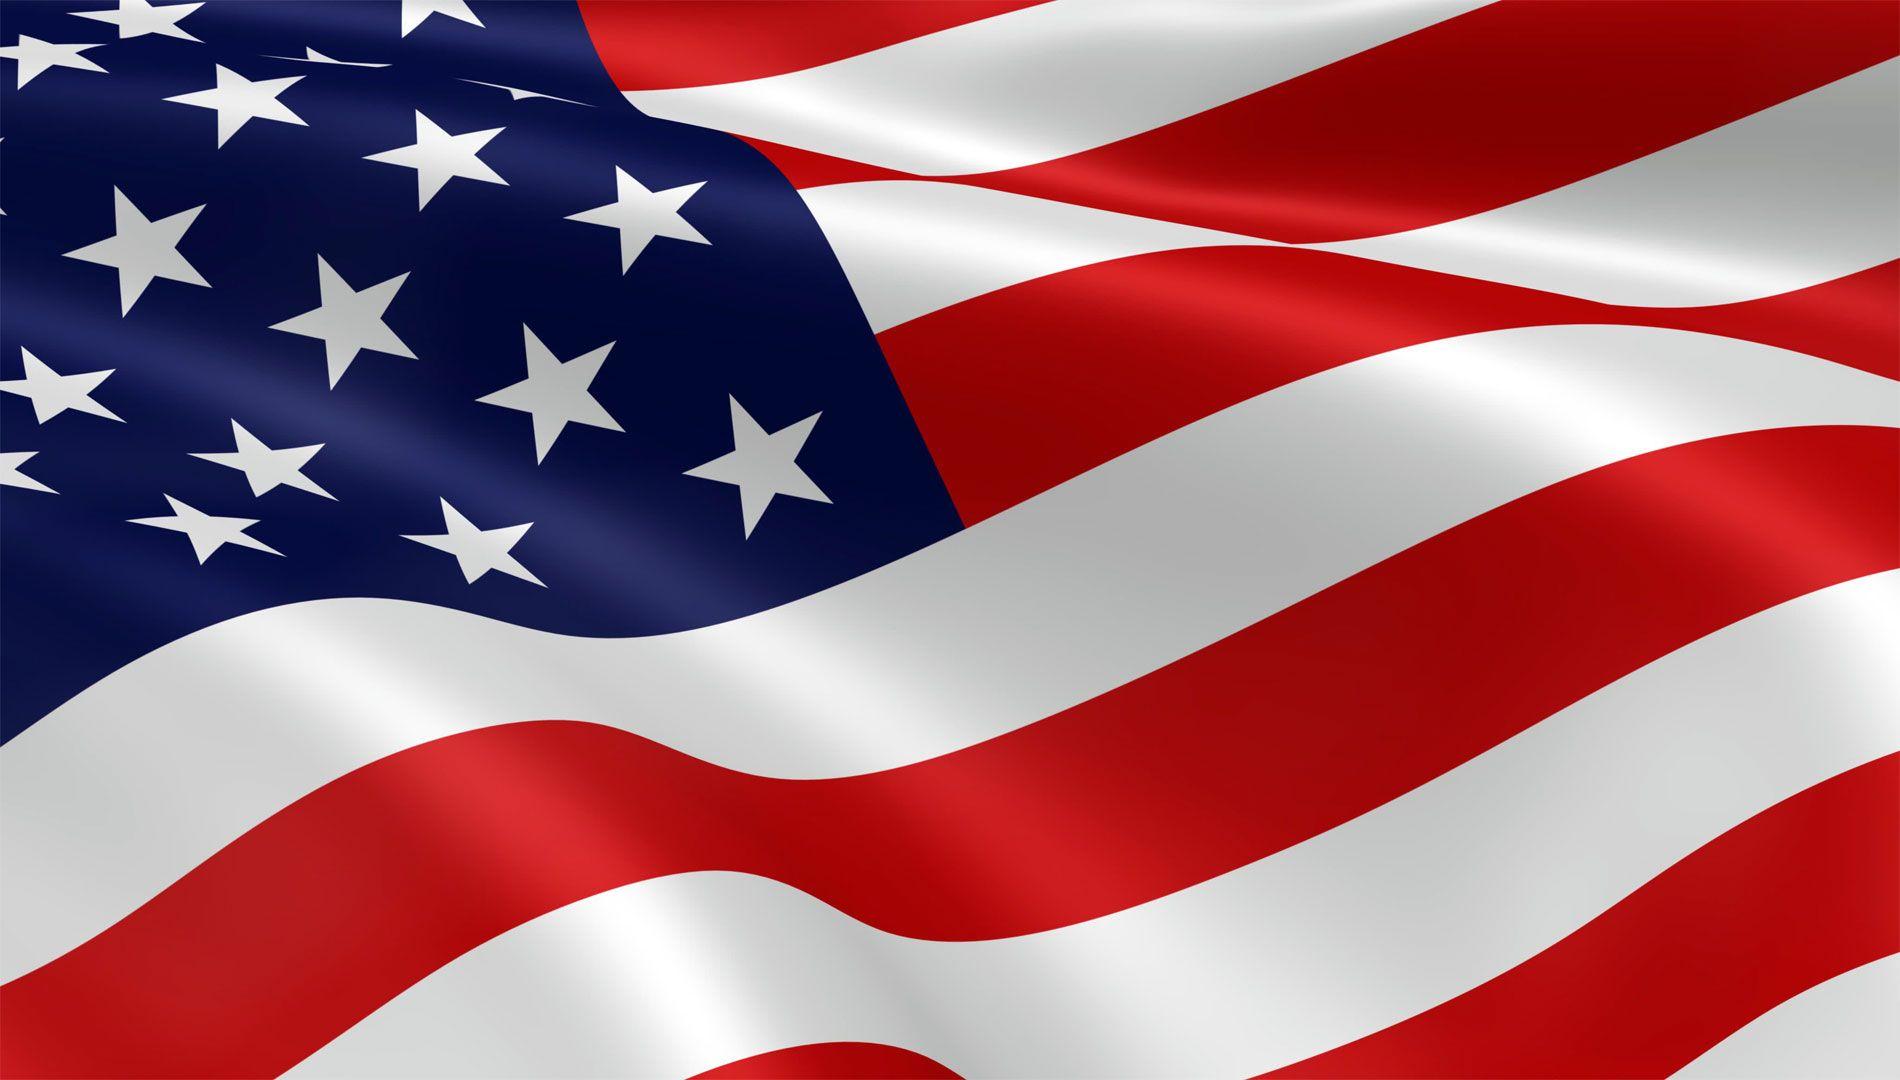 American Flag Hd Wallpapers Top Free American Flag Hd Backgrounds Wallpaperaccess